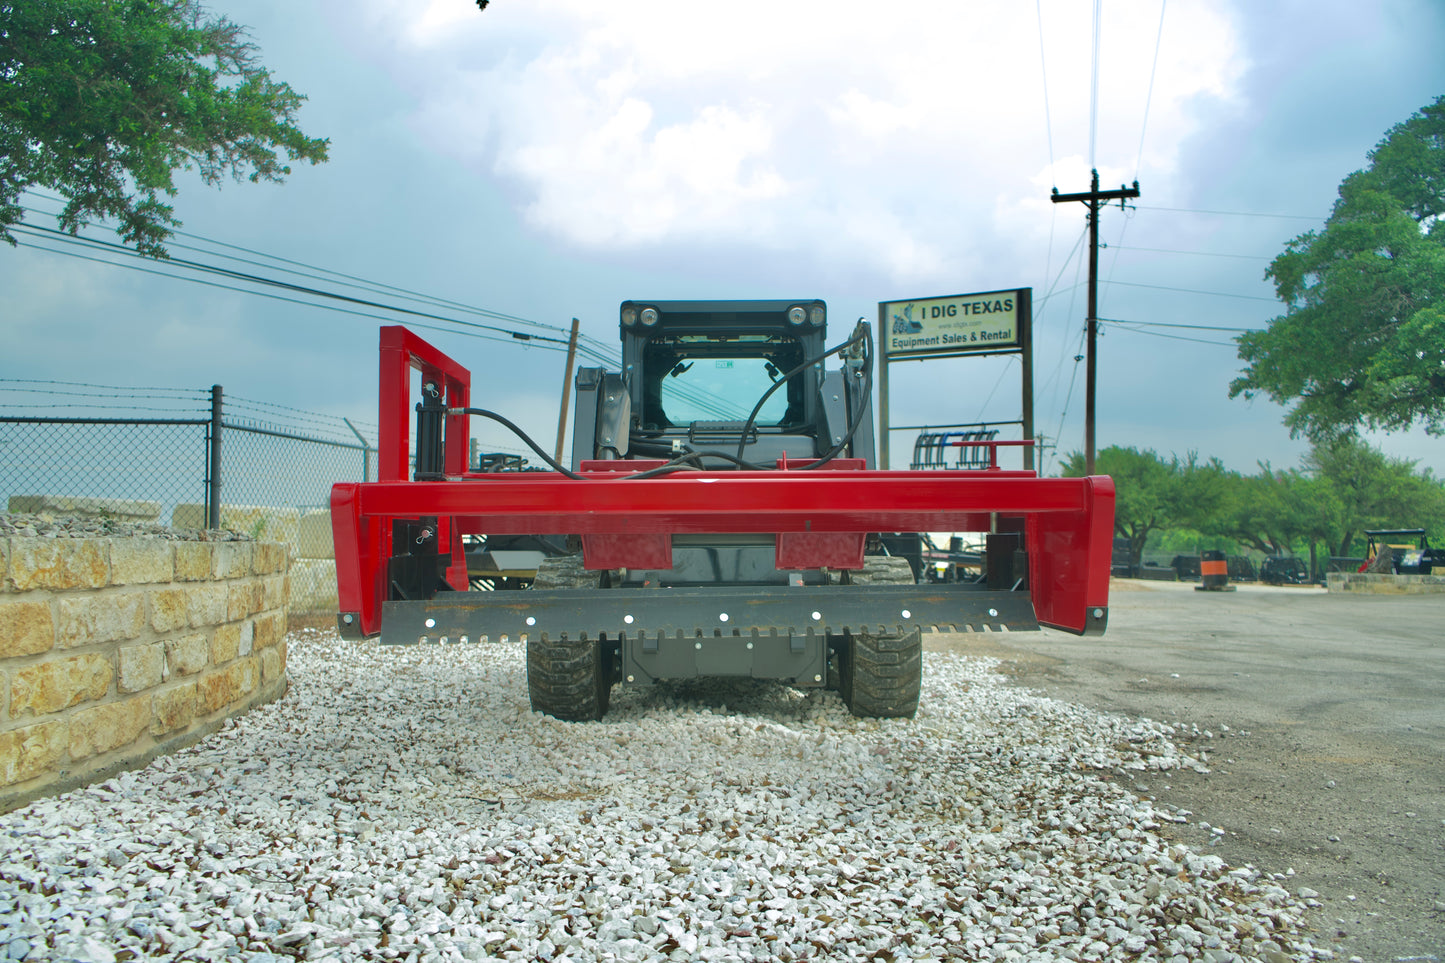 Hydraulic Road Grader - "The Pusher"